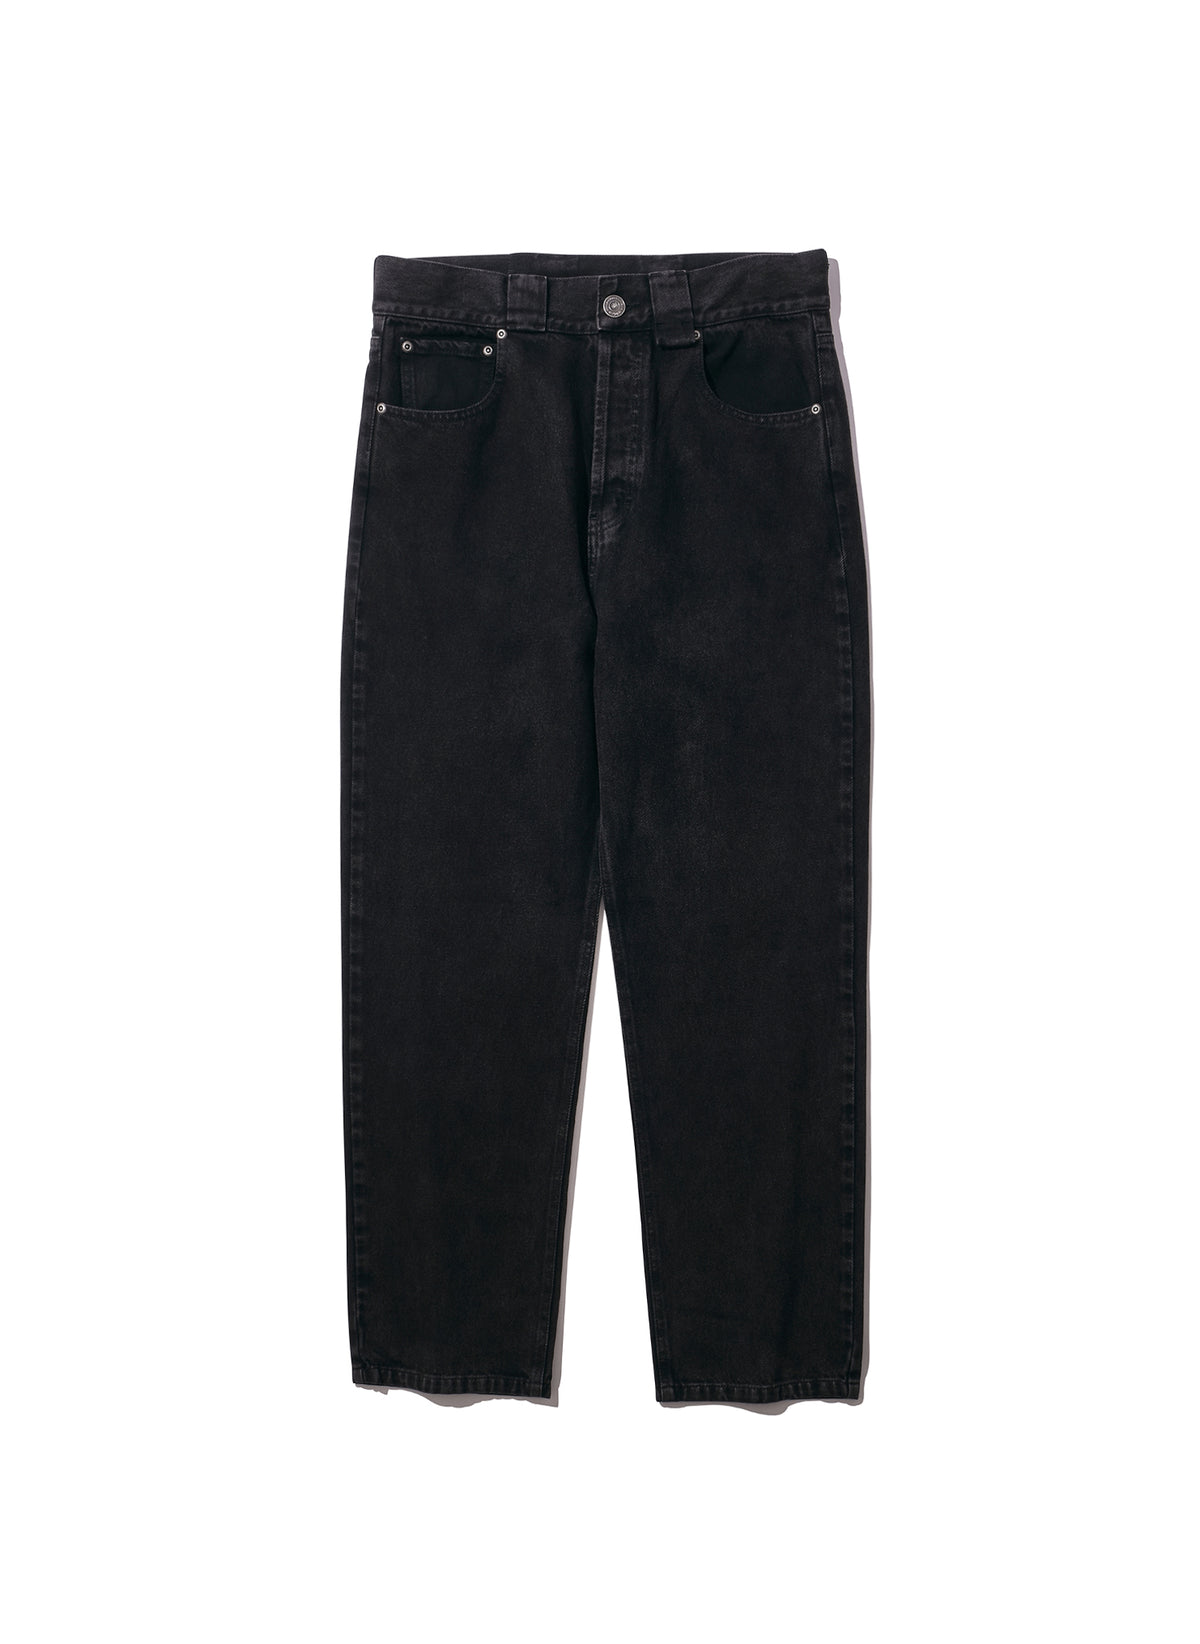 WILLY CHAVARRIA / LOVE GARAGE JEAN WASHED BLACK